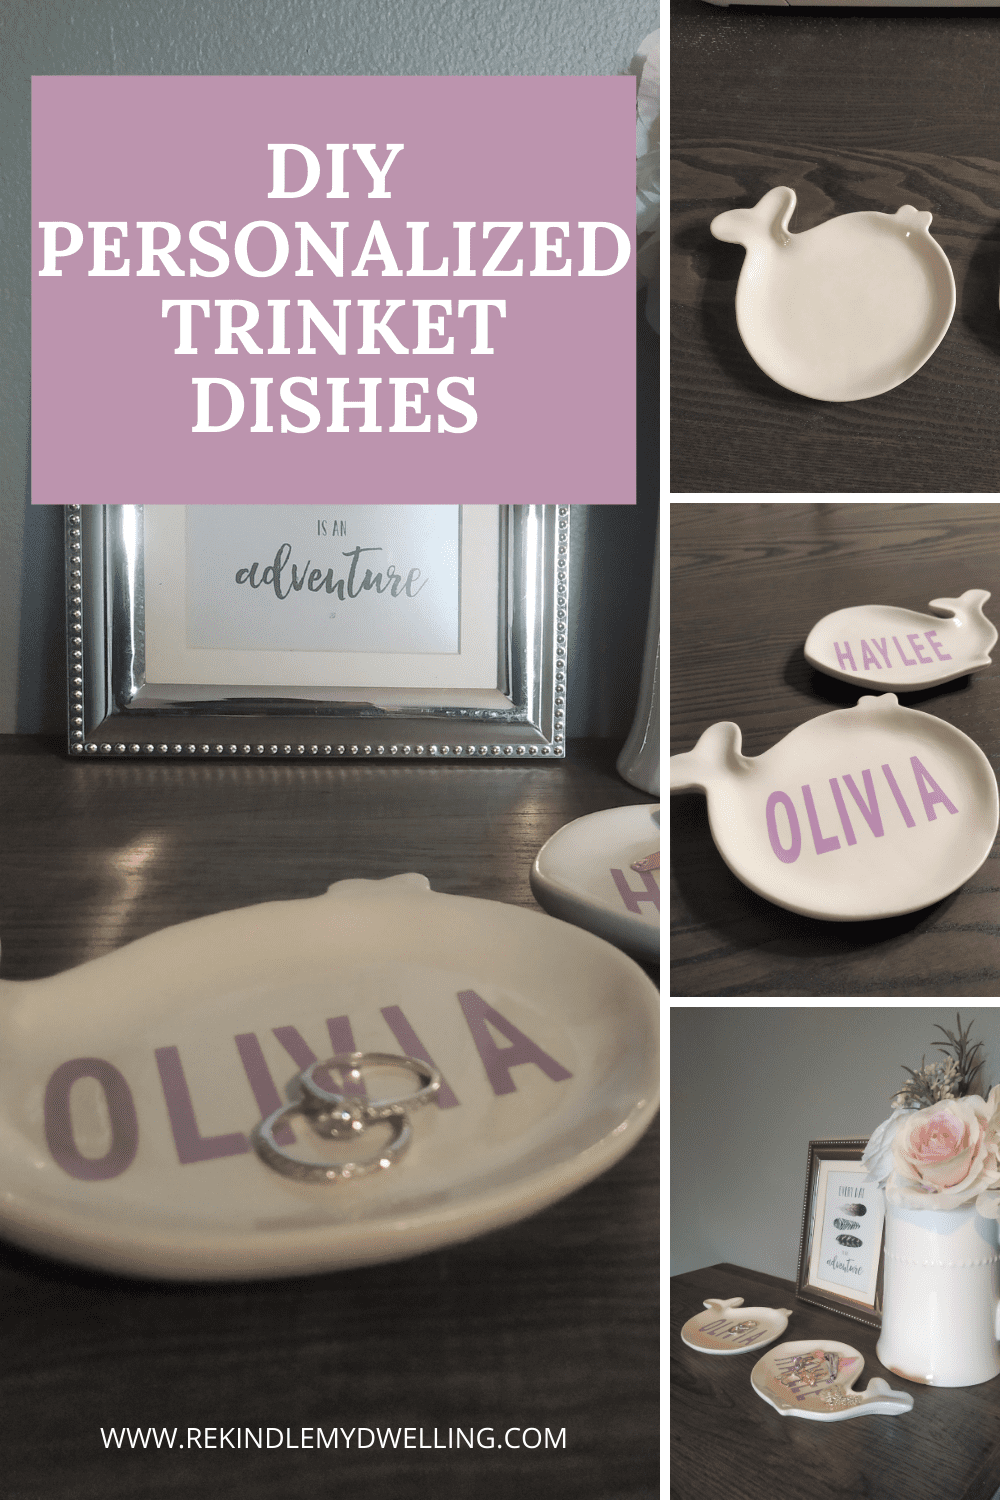 Collage of personalized trinket dishes with text overlay.